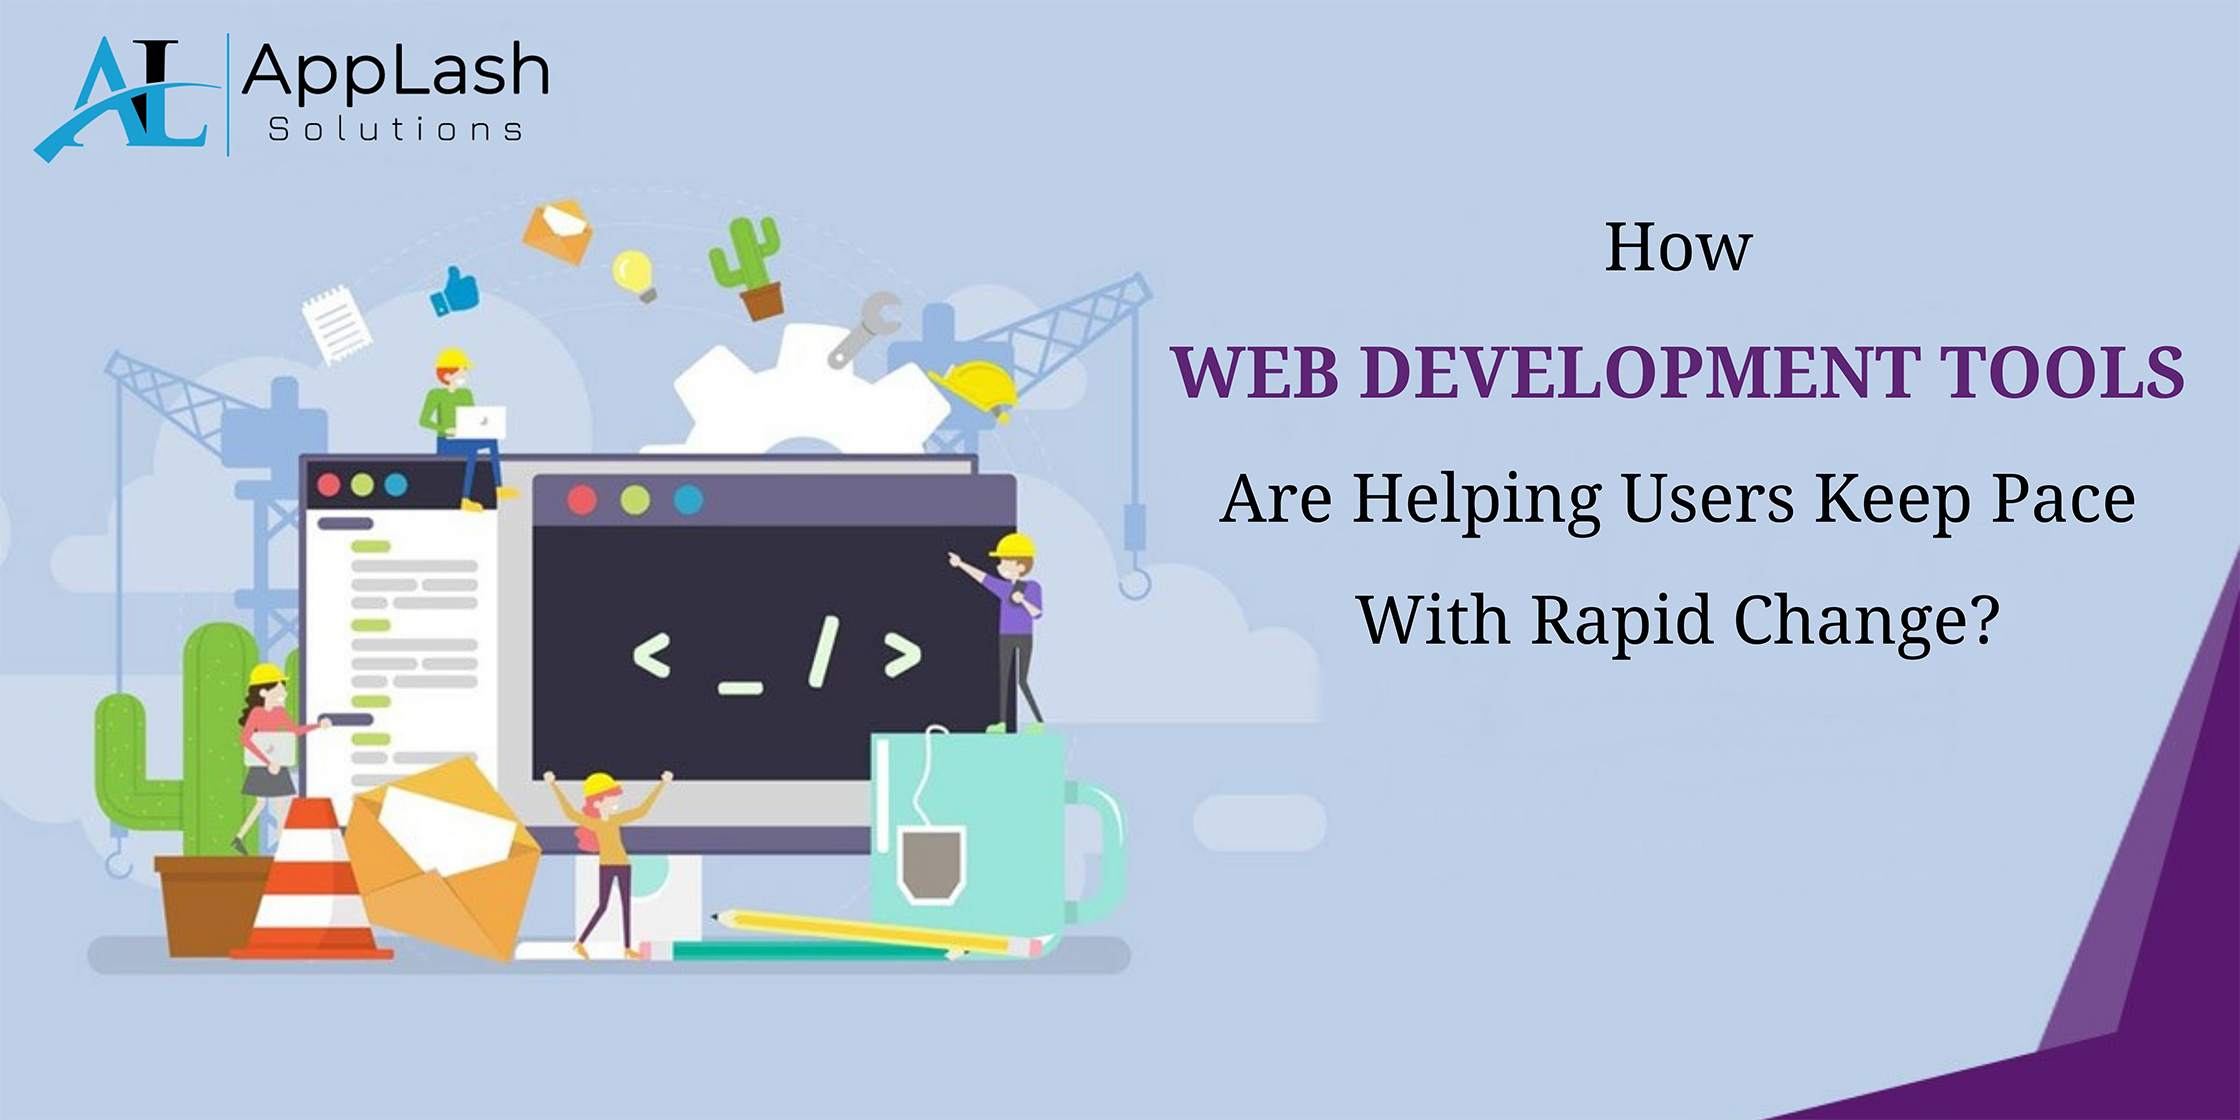 How Web Development Tools Are Helping Users Keep Pace With Rapid Change